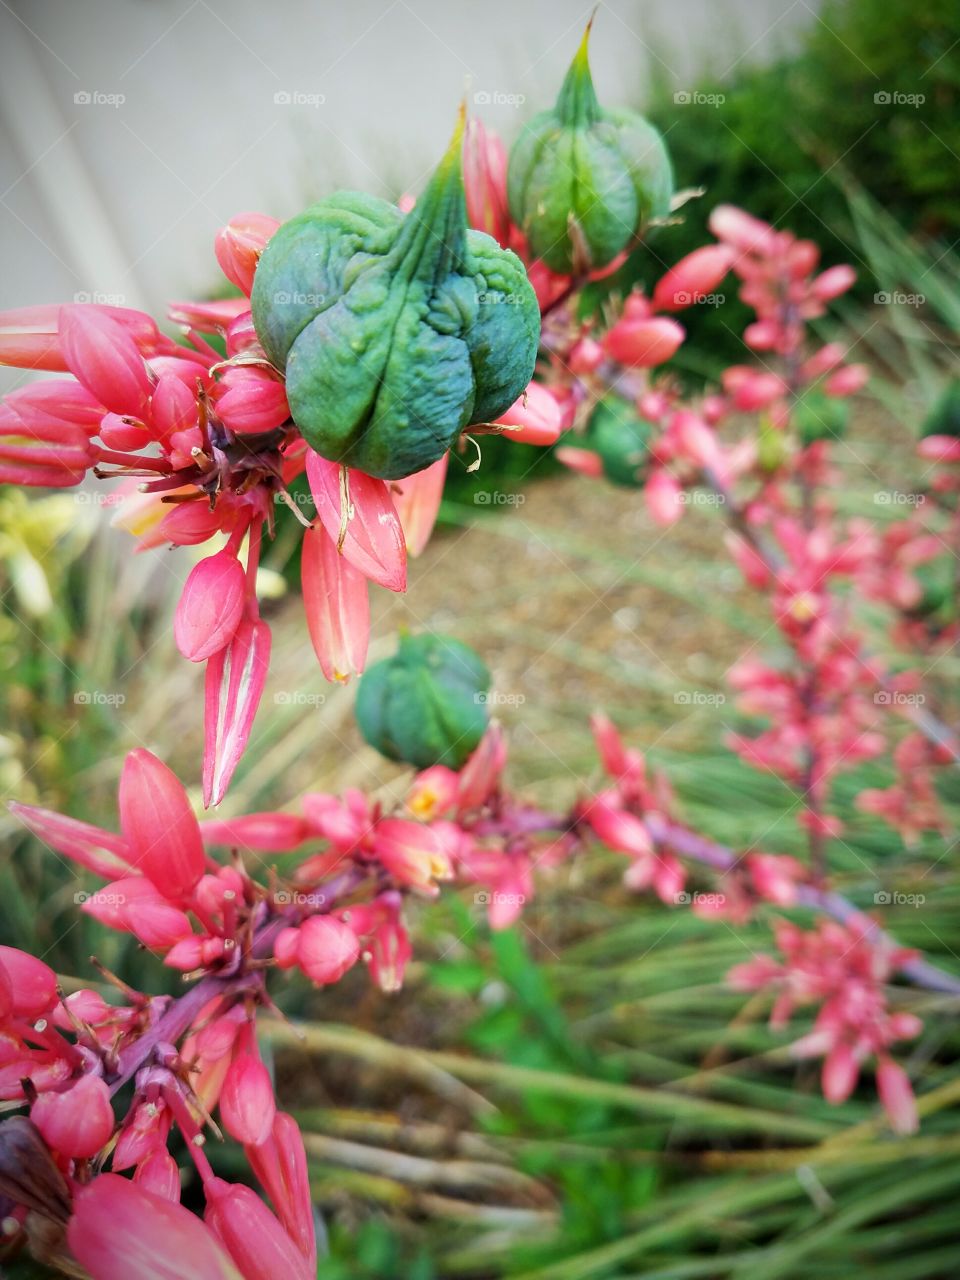 Pink blooms with green pods